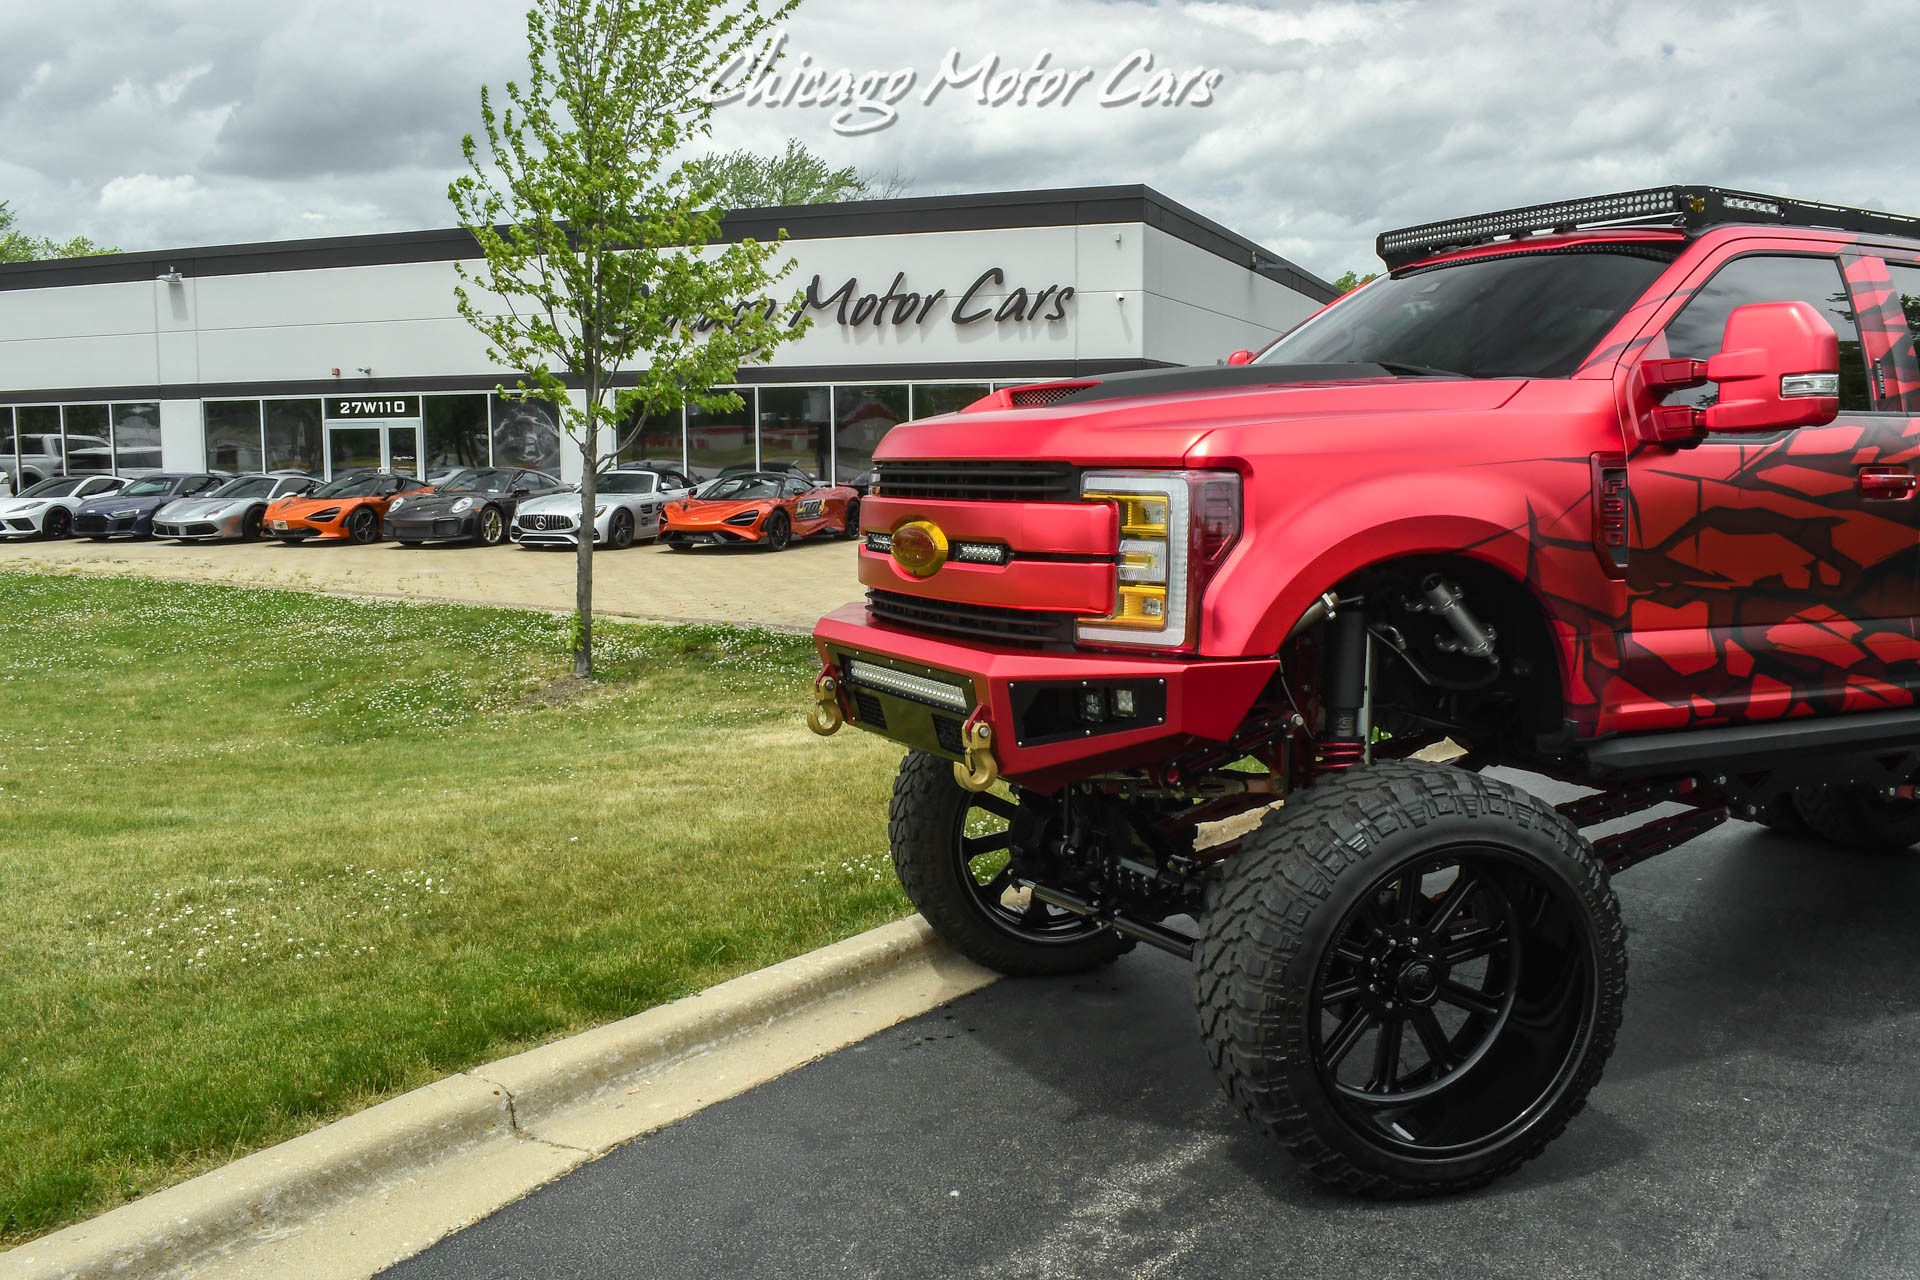 Used-2017-Ford-Super-Duty-F350-Lariat-SEMA-TRUCK-Over-100K-In-UPGRADES-Amazing-Build